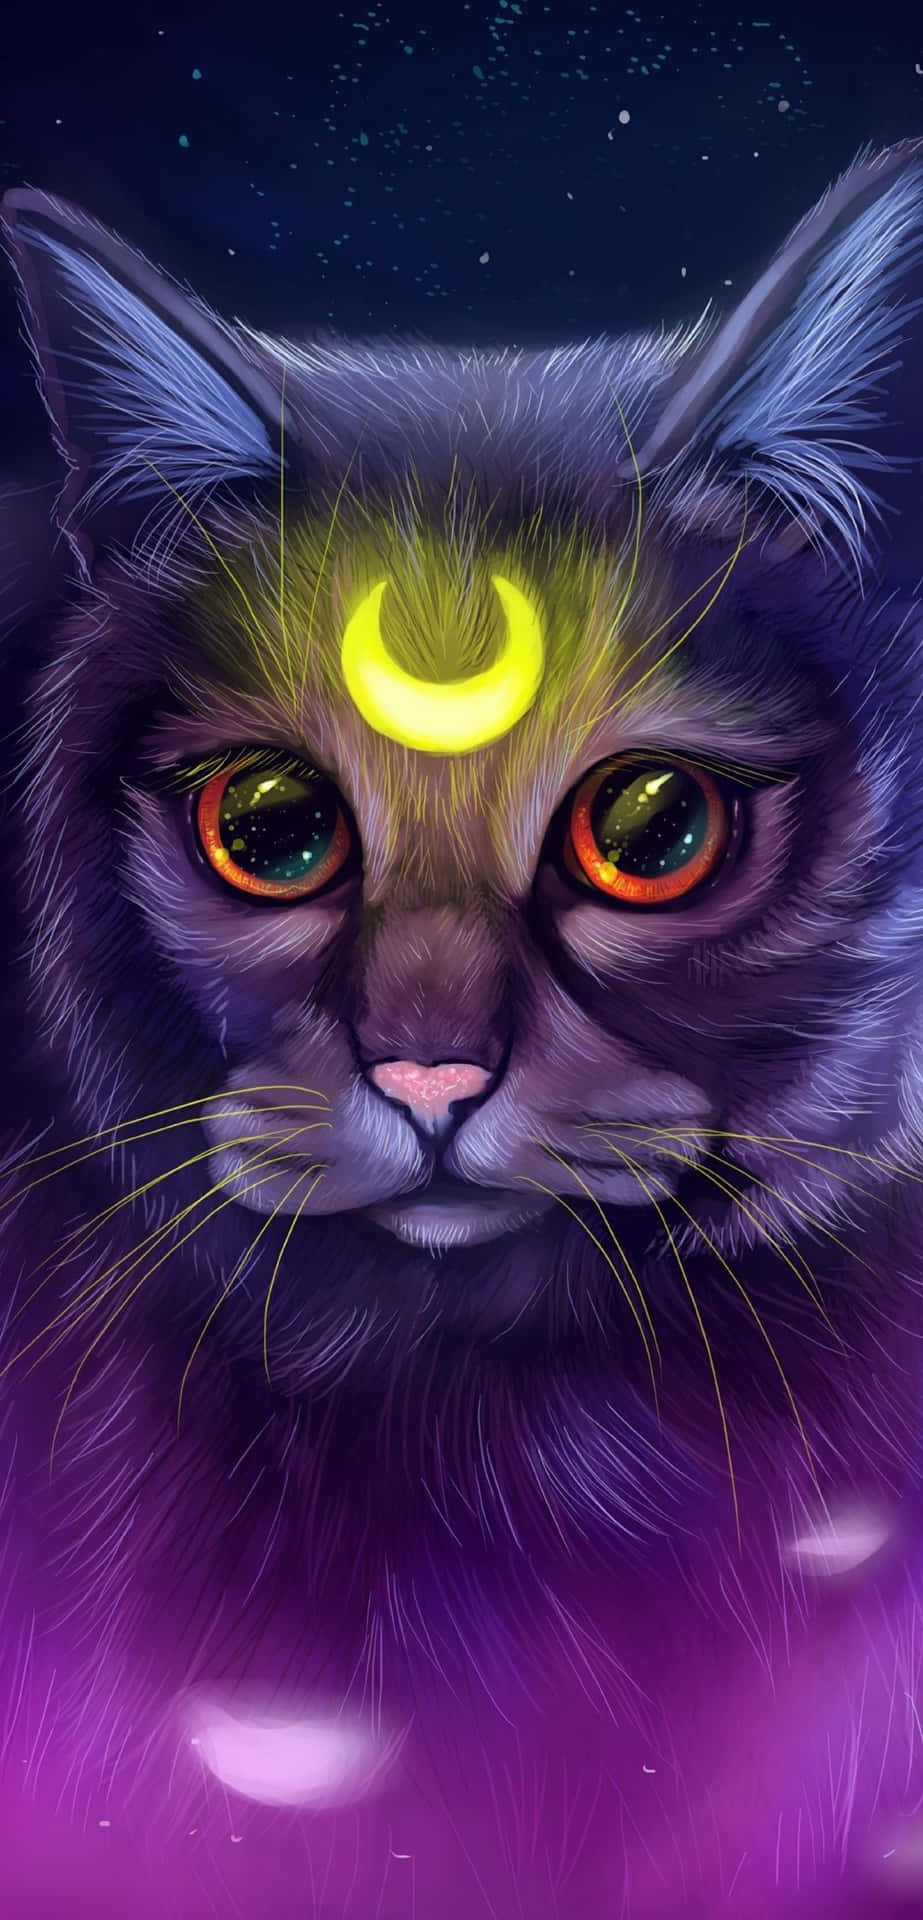 Download Explore the night sky with this adventurous Galaxy Cat Wallpaper   Wallpaperscom